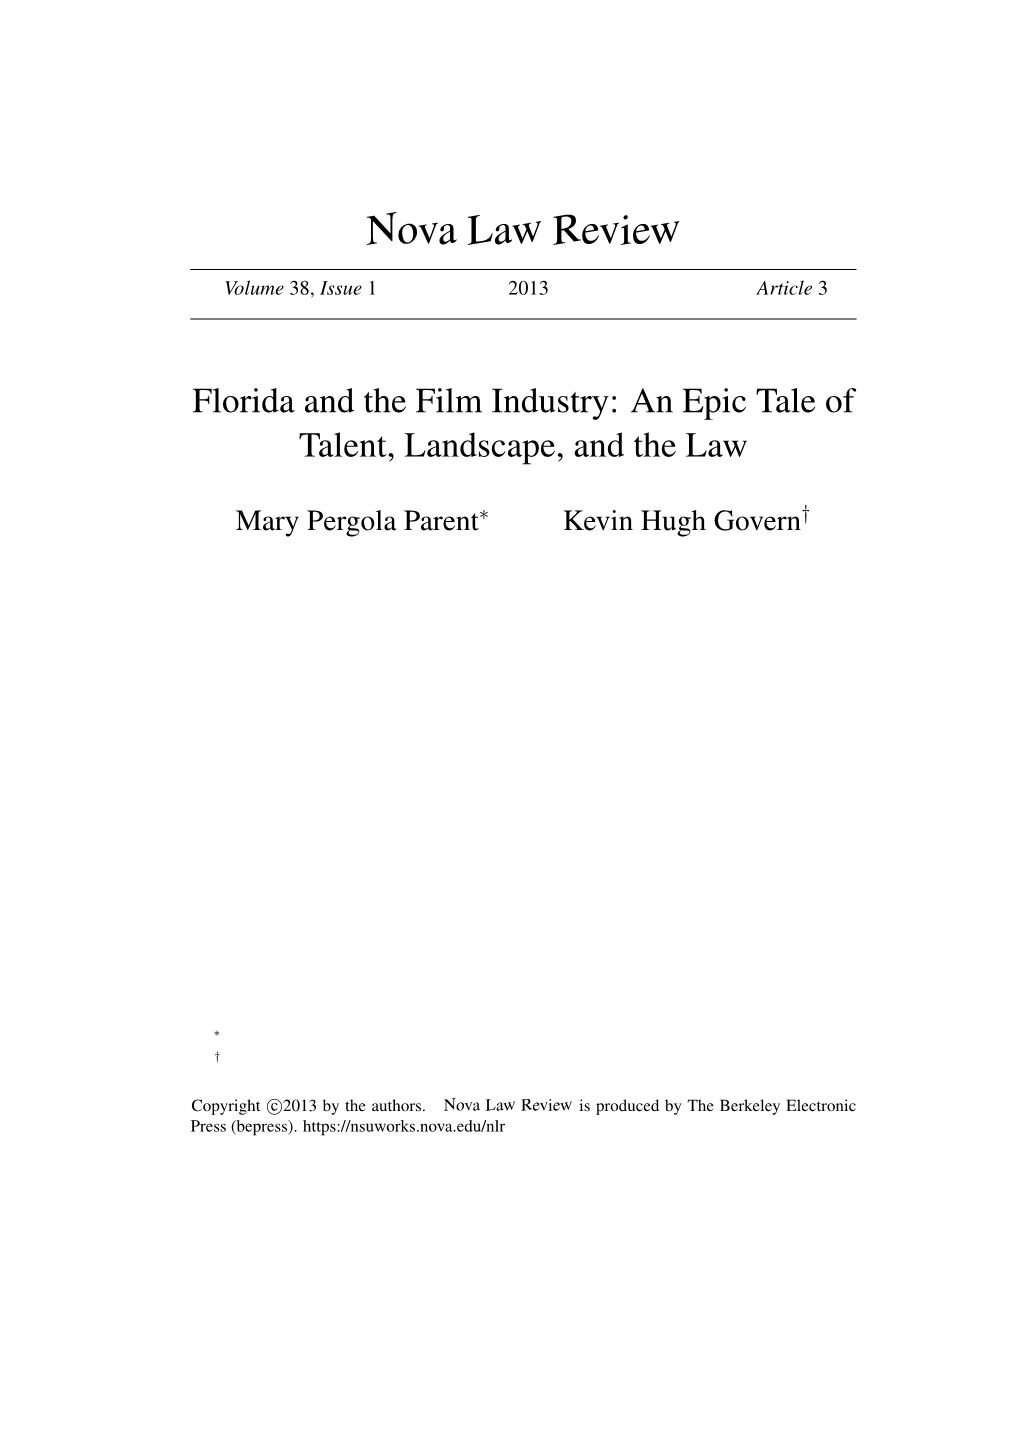 Florida and the Film Industry: an Epic Tale of Talent, Landscape, and the Law